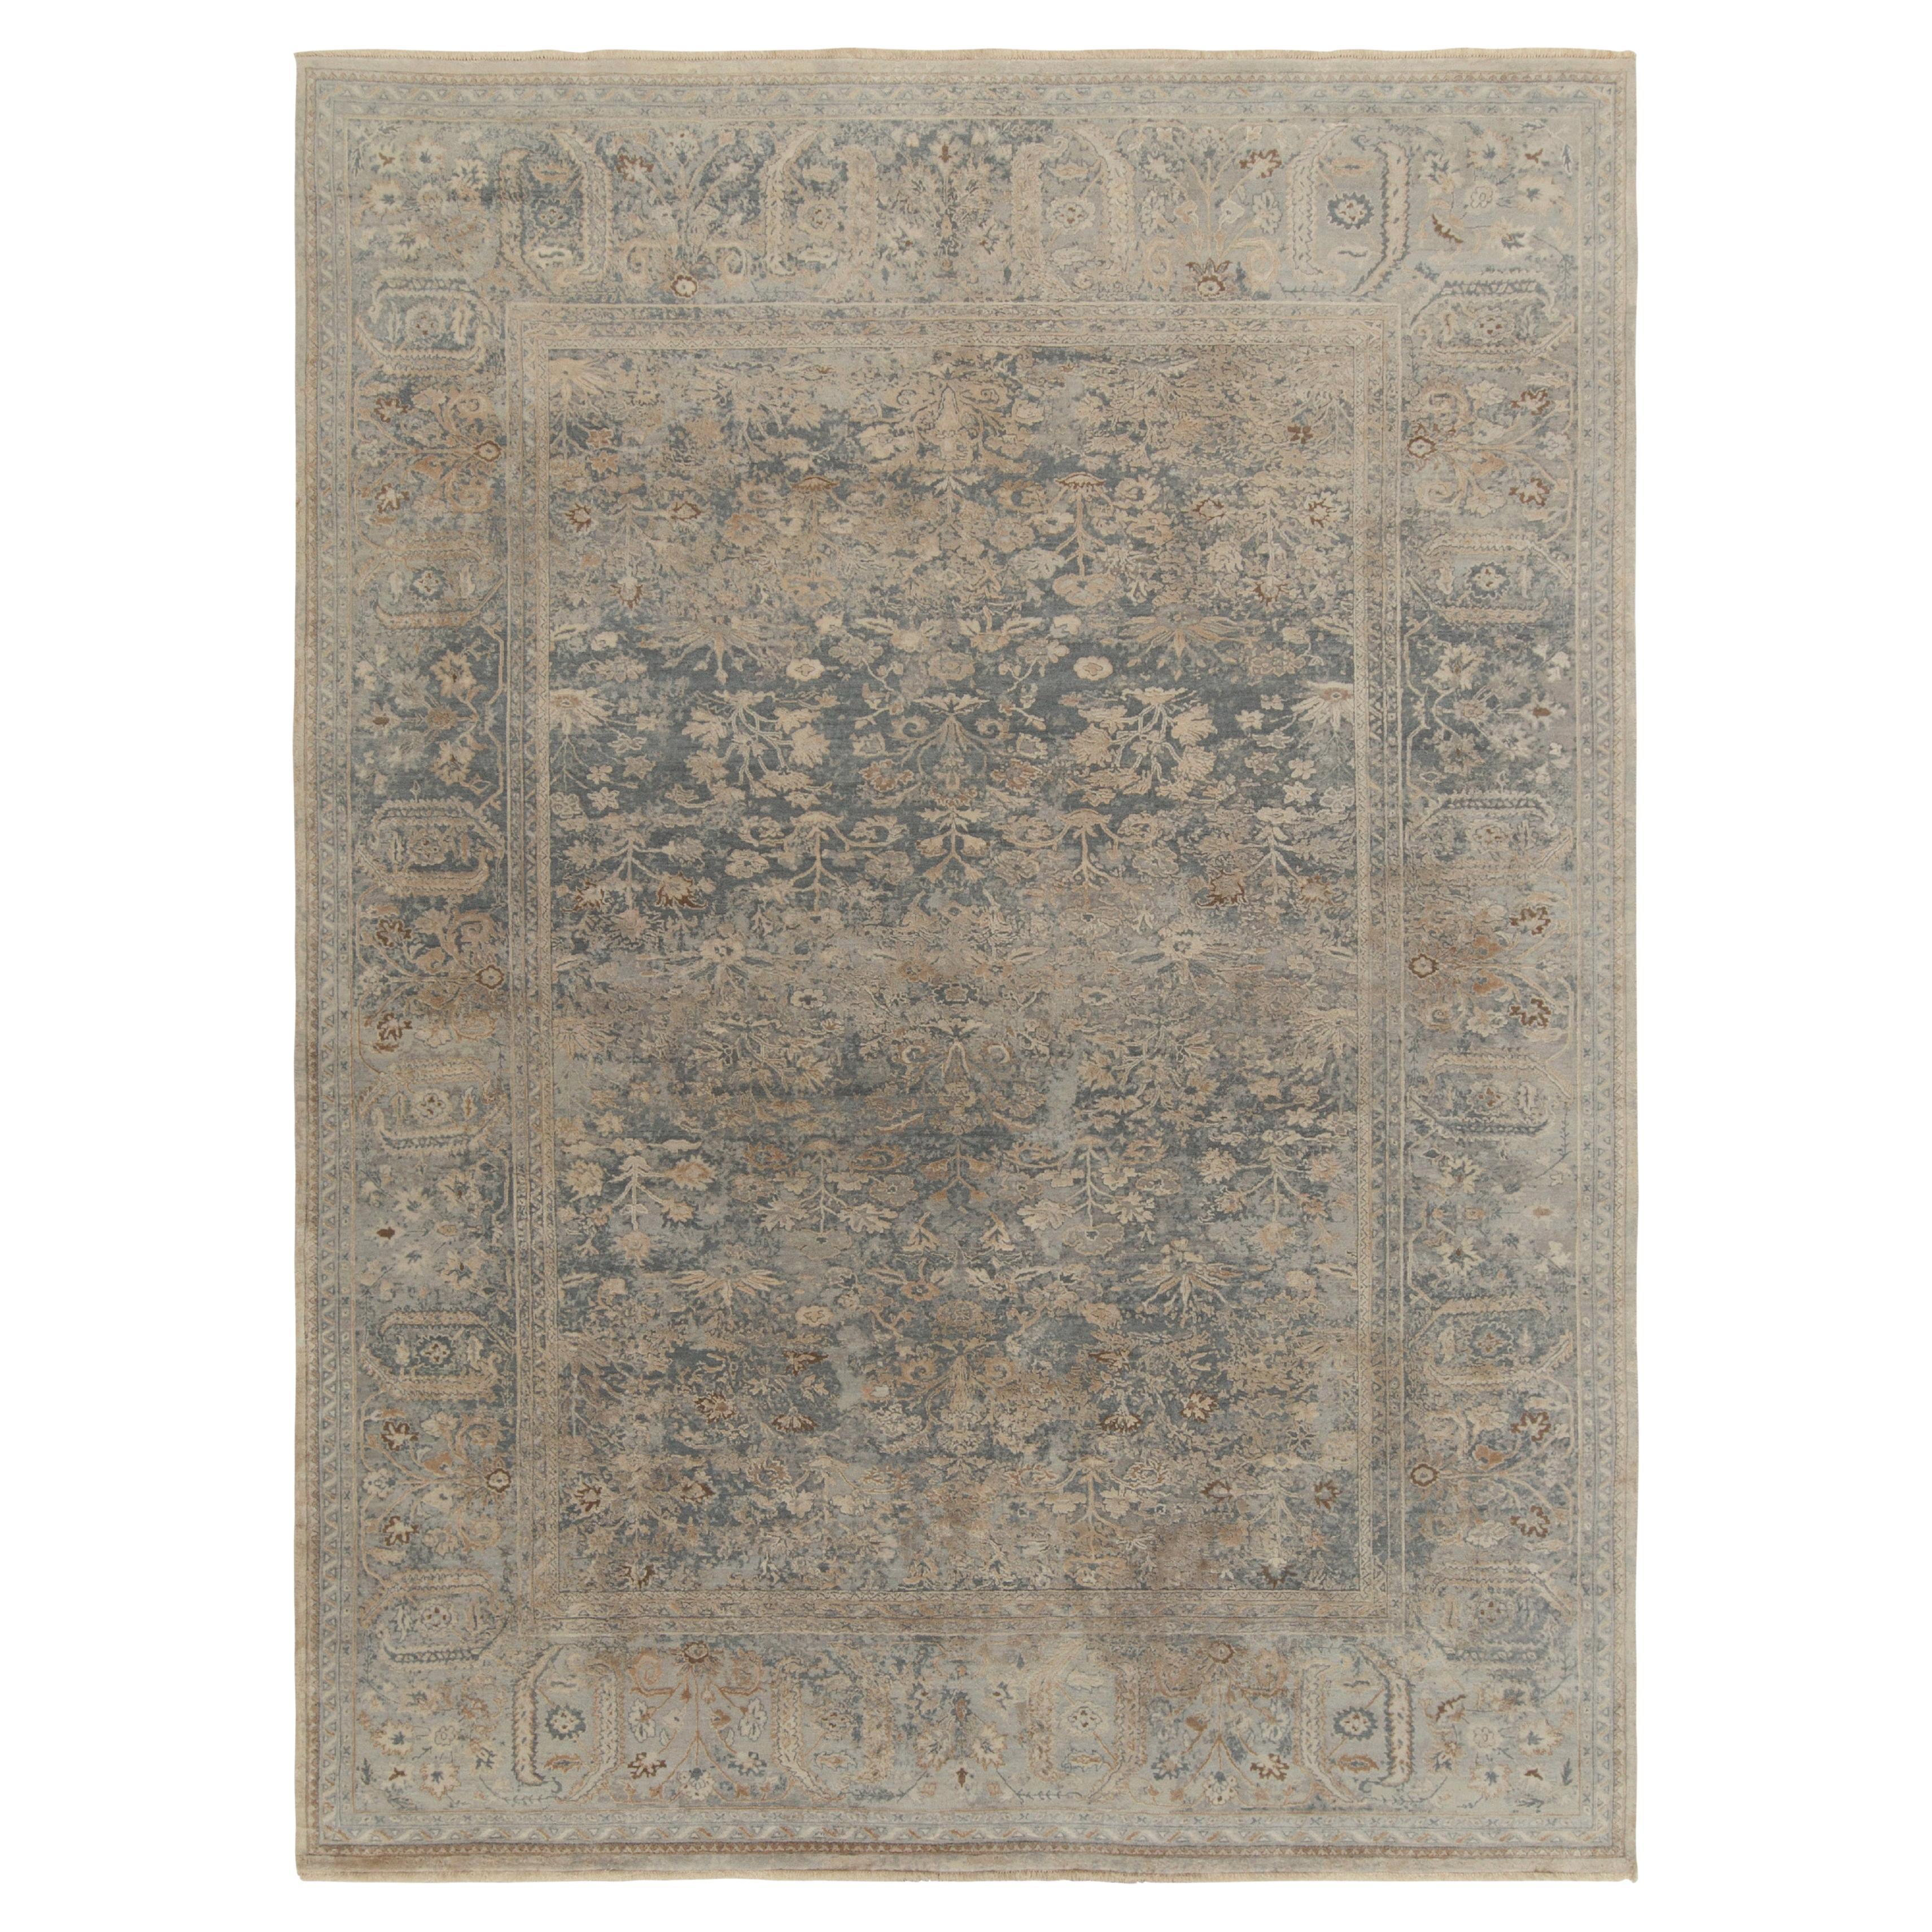 Rug & Kilim’s Classic Style Rug in Silver-Gray, Blue & Beige Floral Pattern For Sale